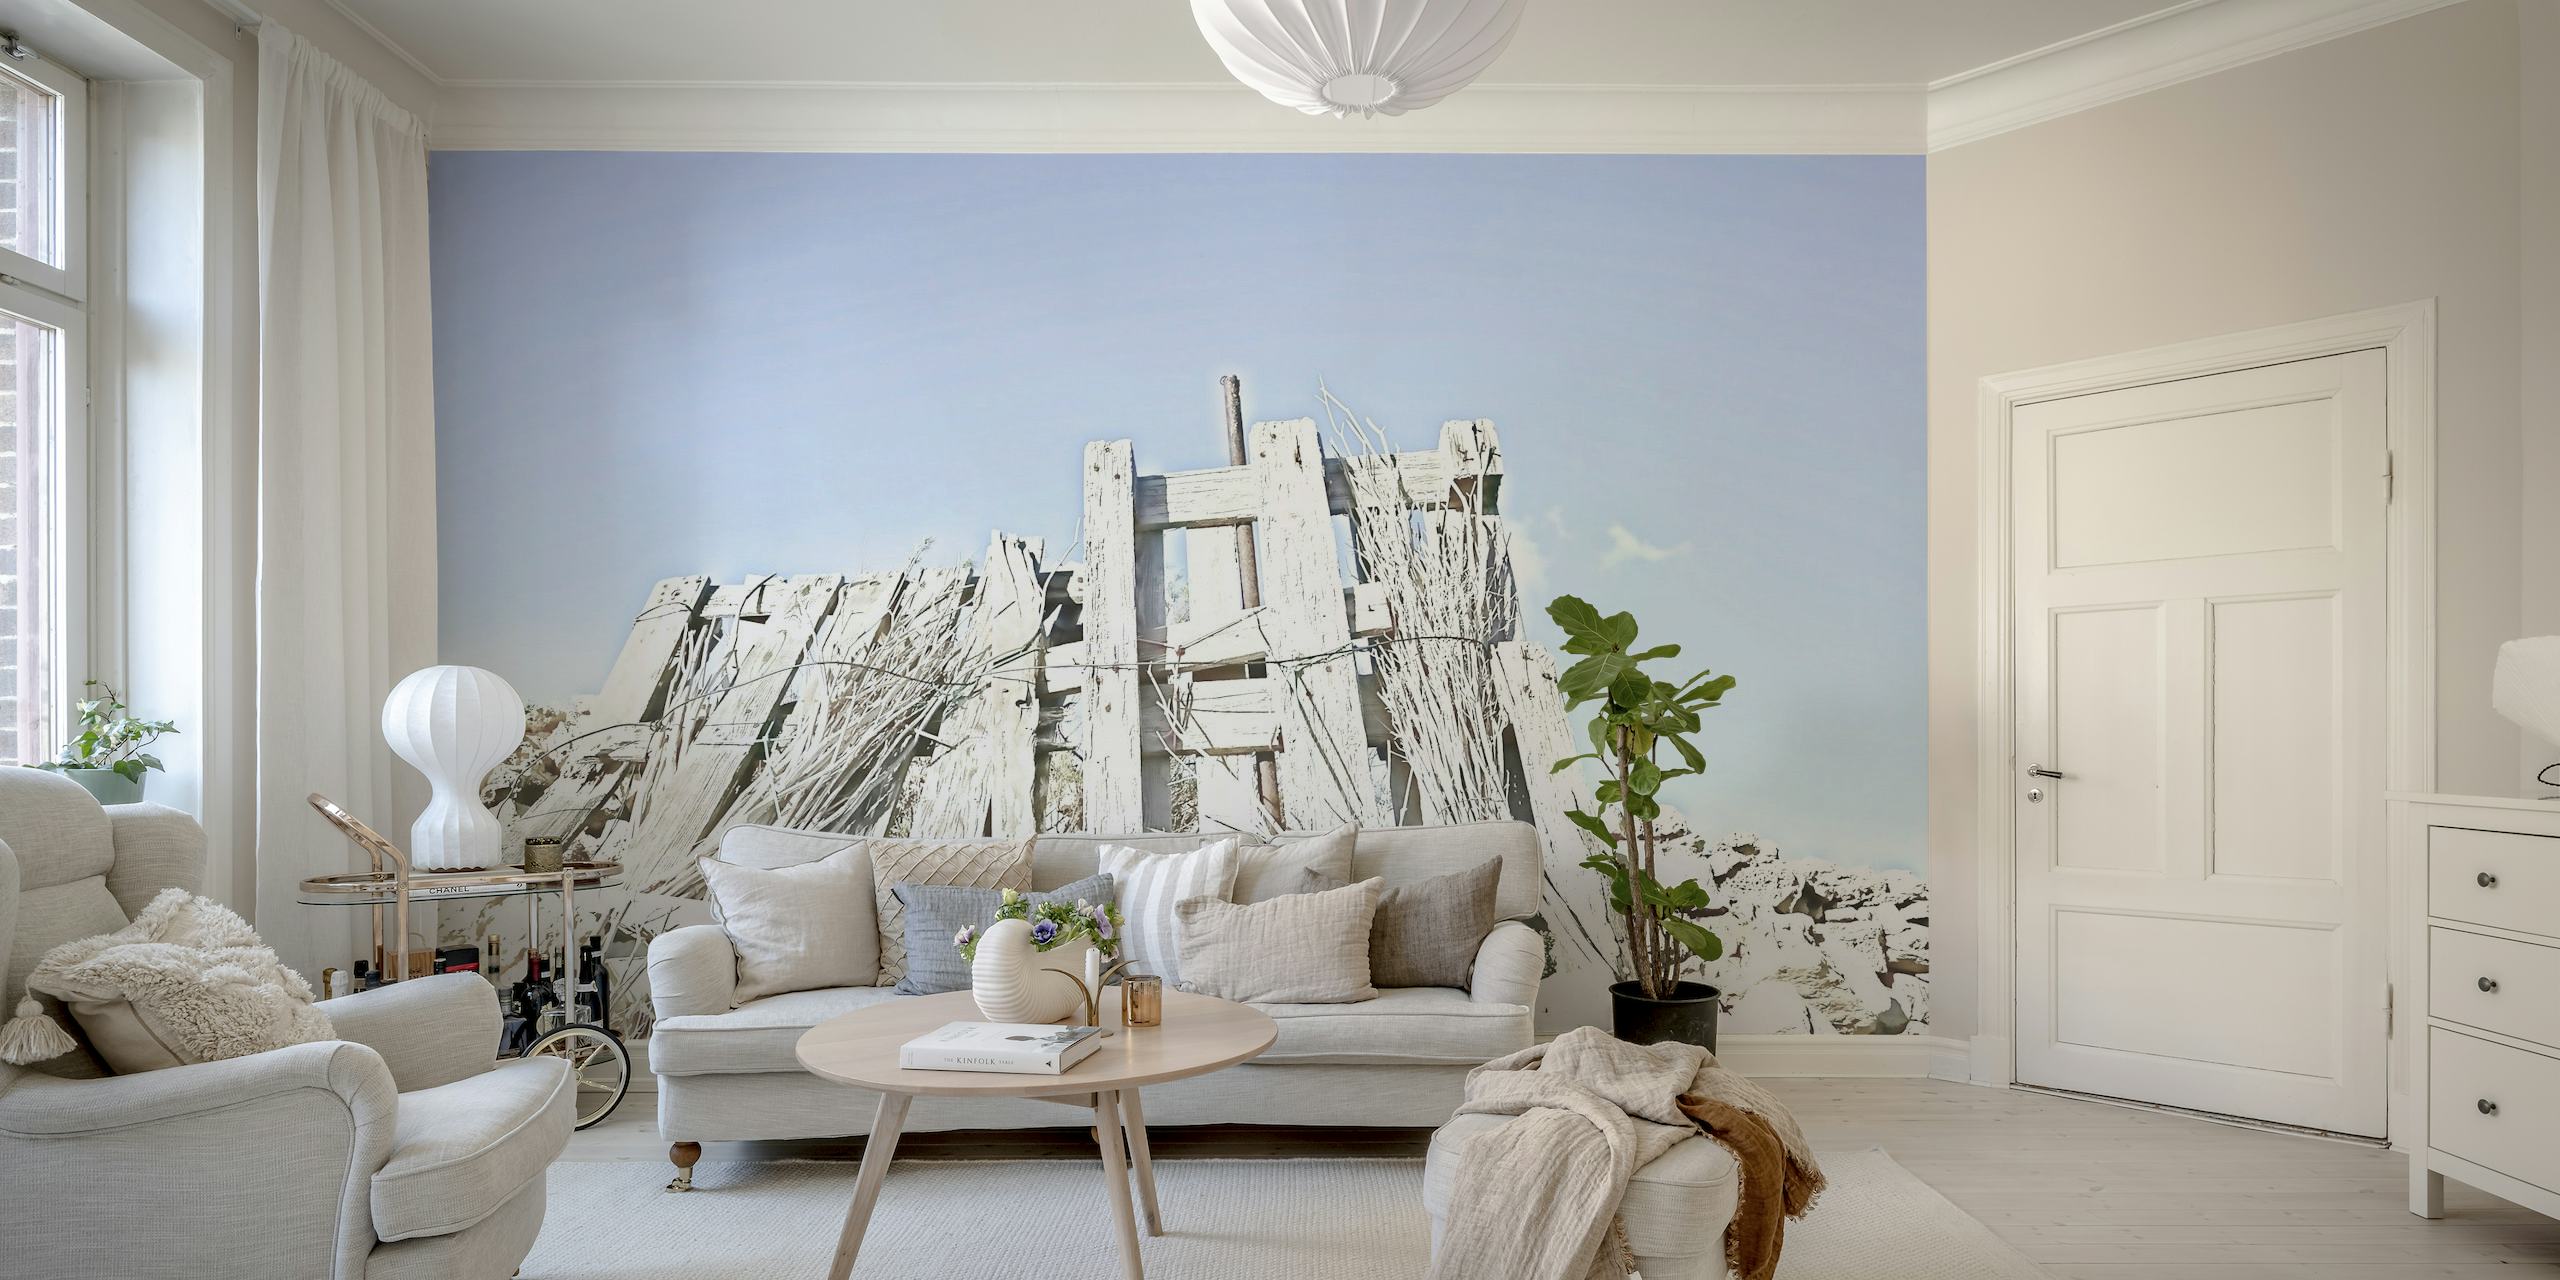 Tranquil pastel countryside wall mural with soft colors and peaceful scenery